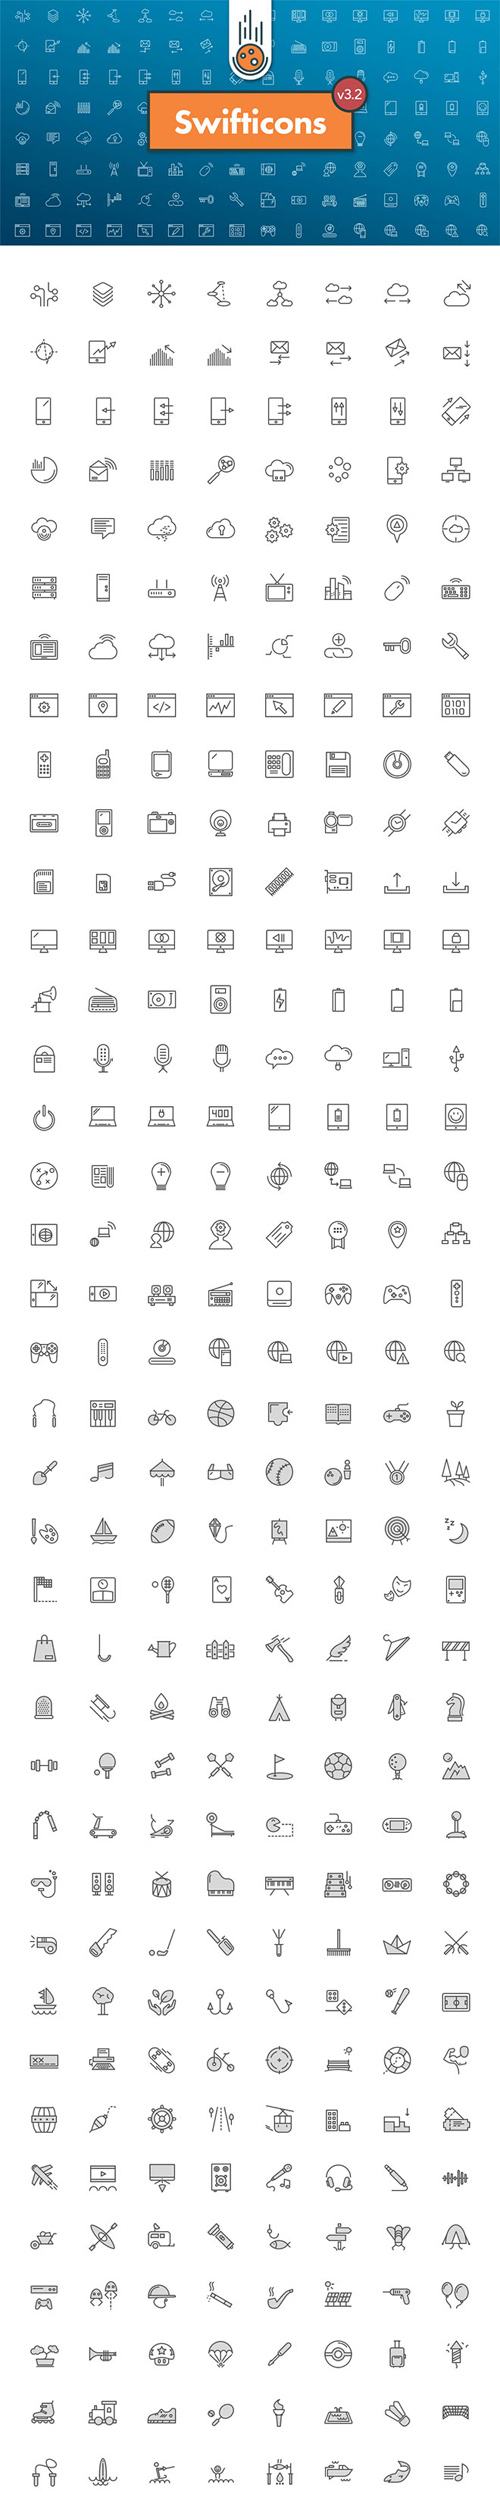 300+ Tech & Activities Icons in Vector [AI/EPS/SVG/PNG/SKETCH]